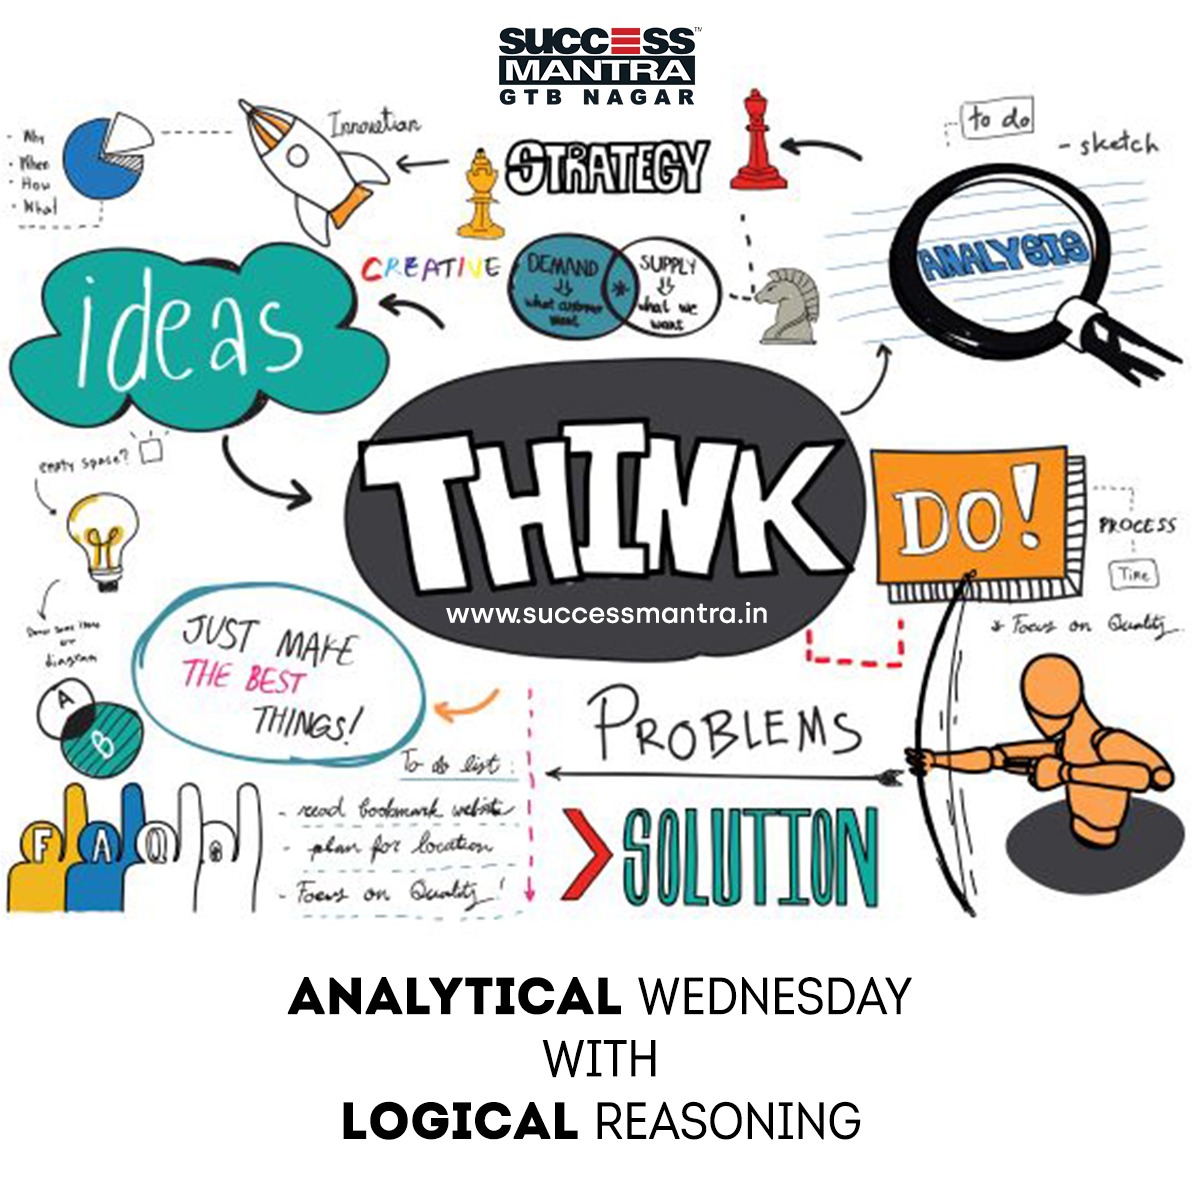 Questions on Logical Reasoning SMLRQ042